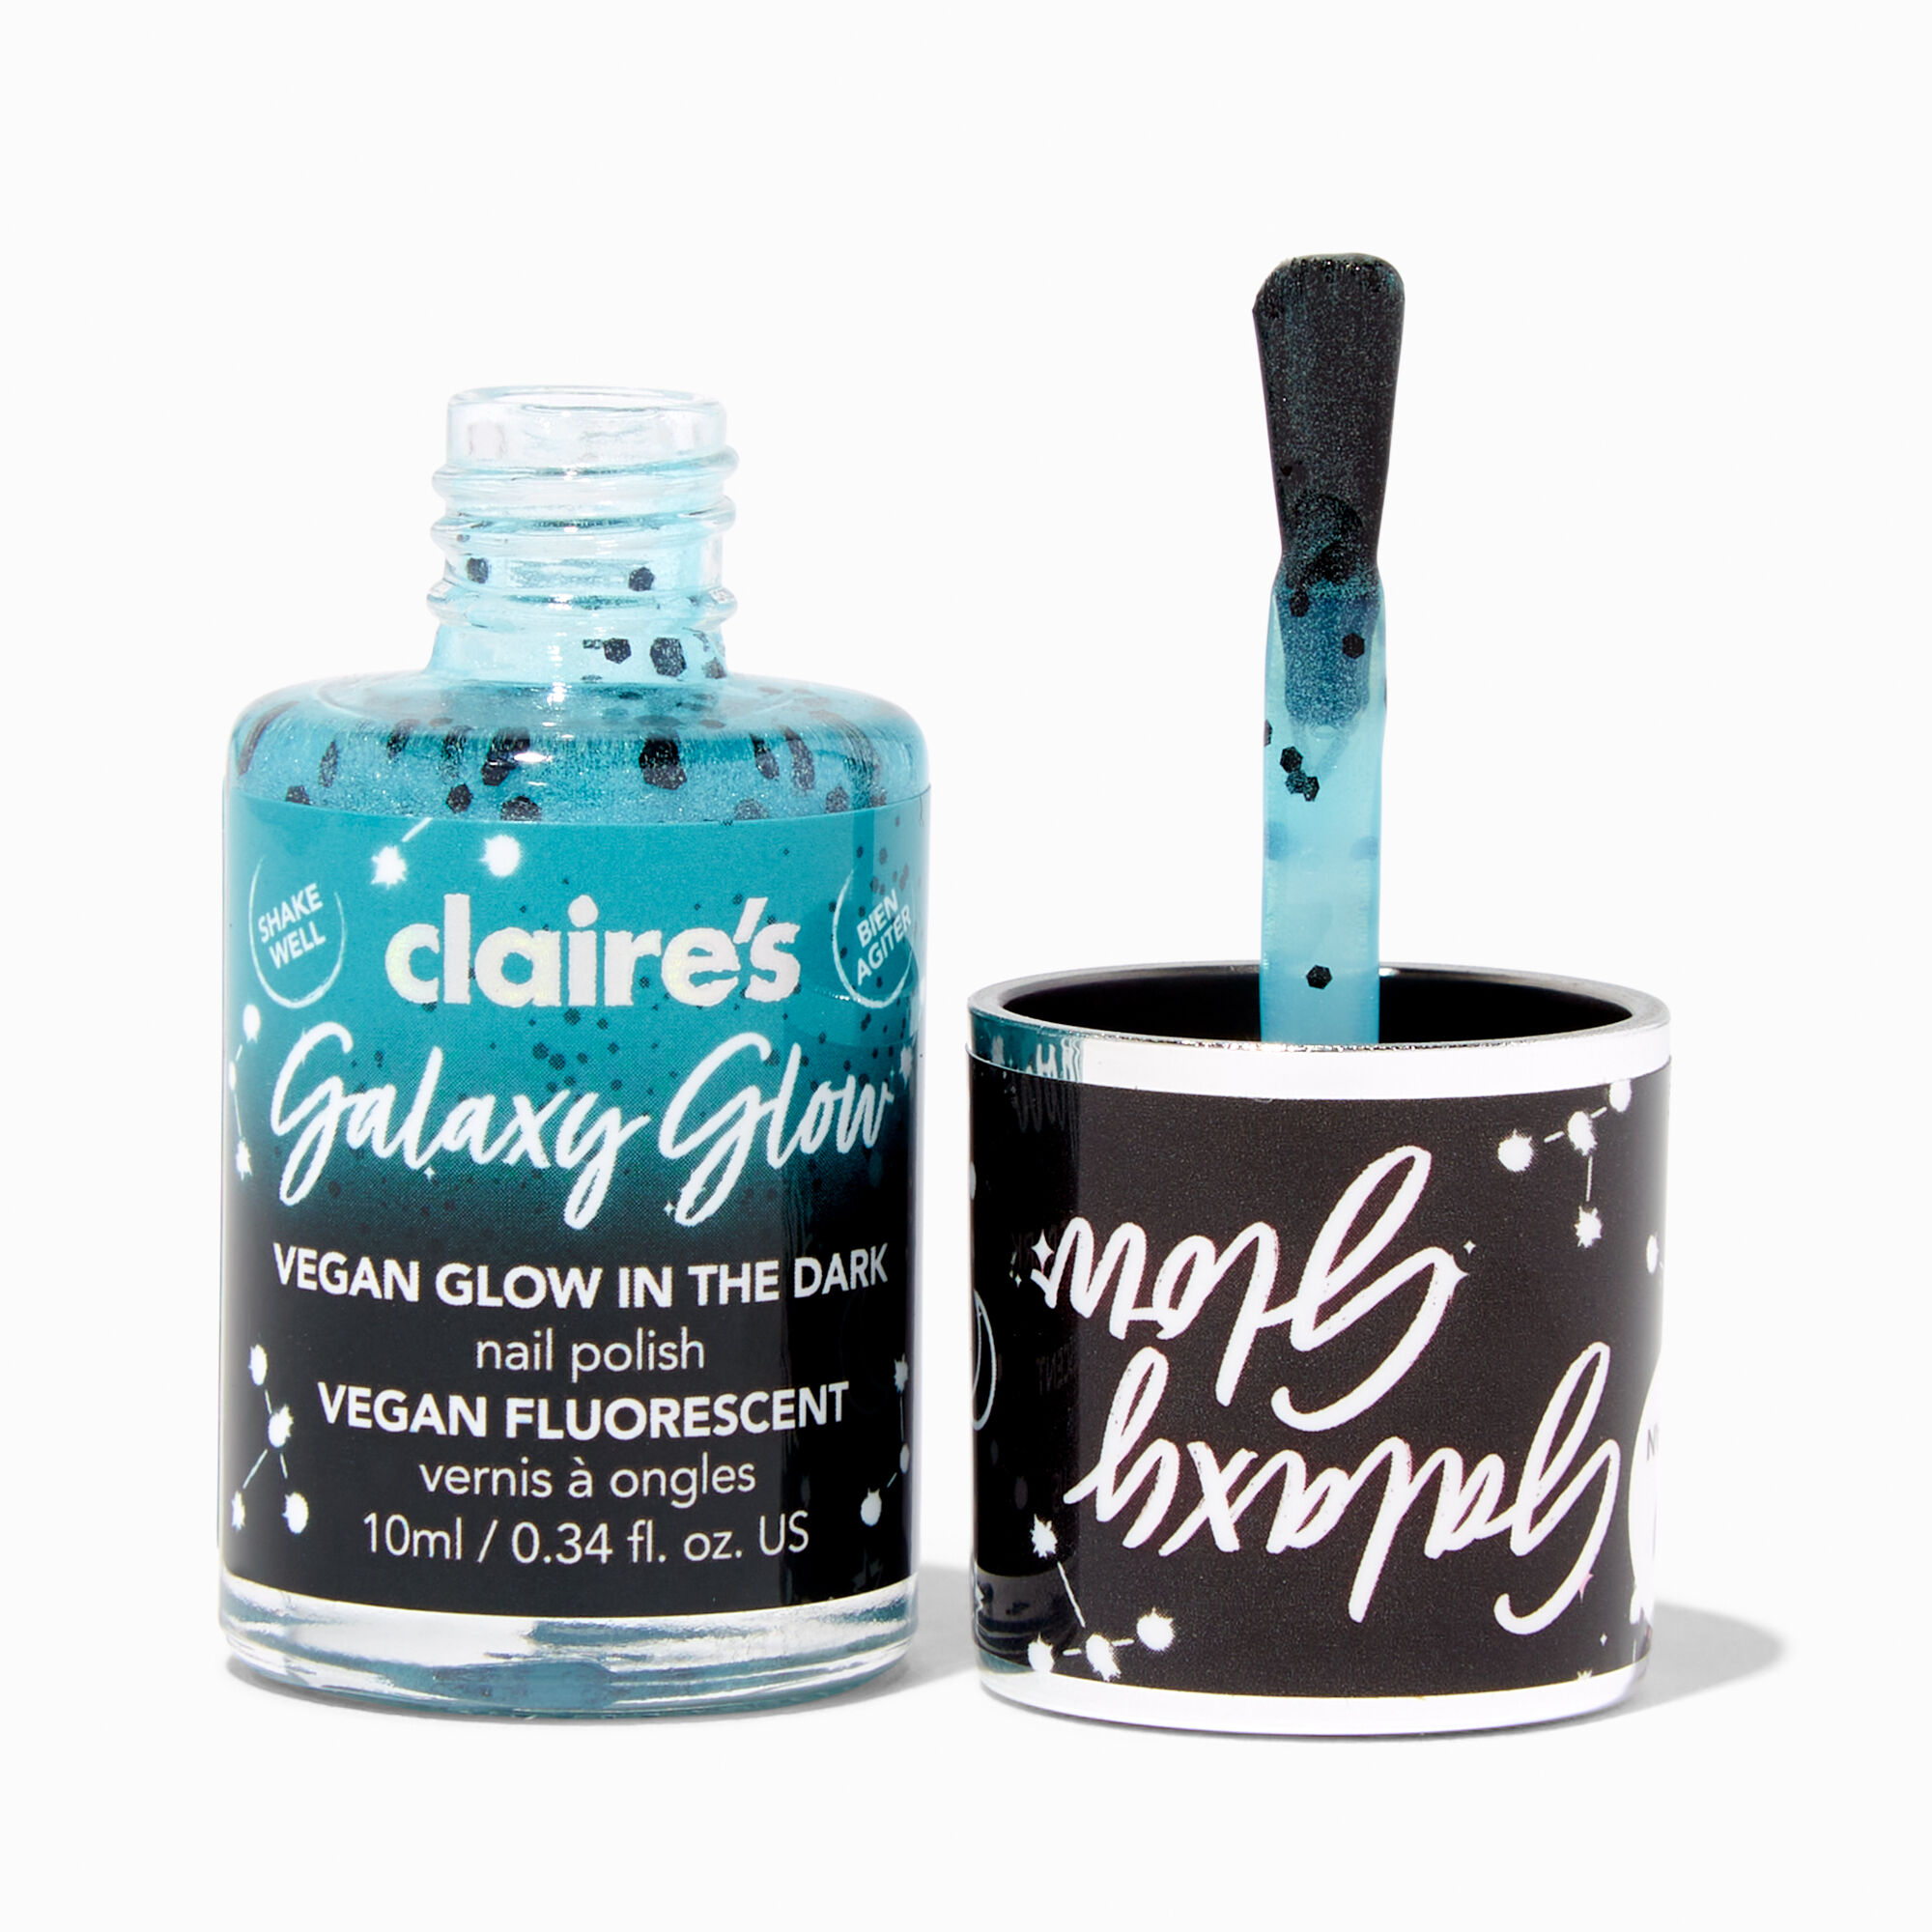 View Claires Galaxy Glow Vegan In The Dark Nail Polish Space information